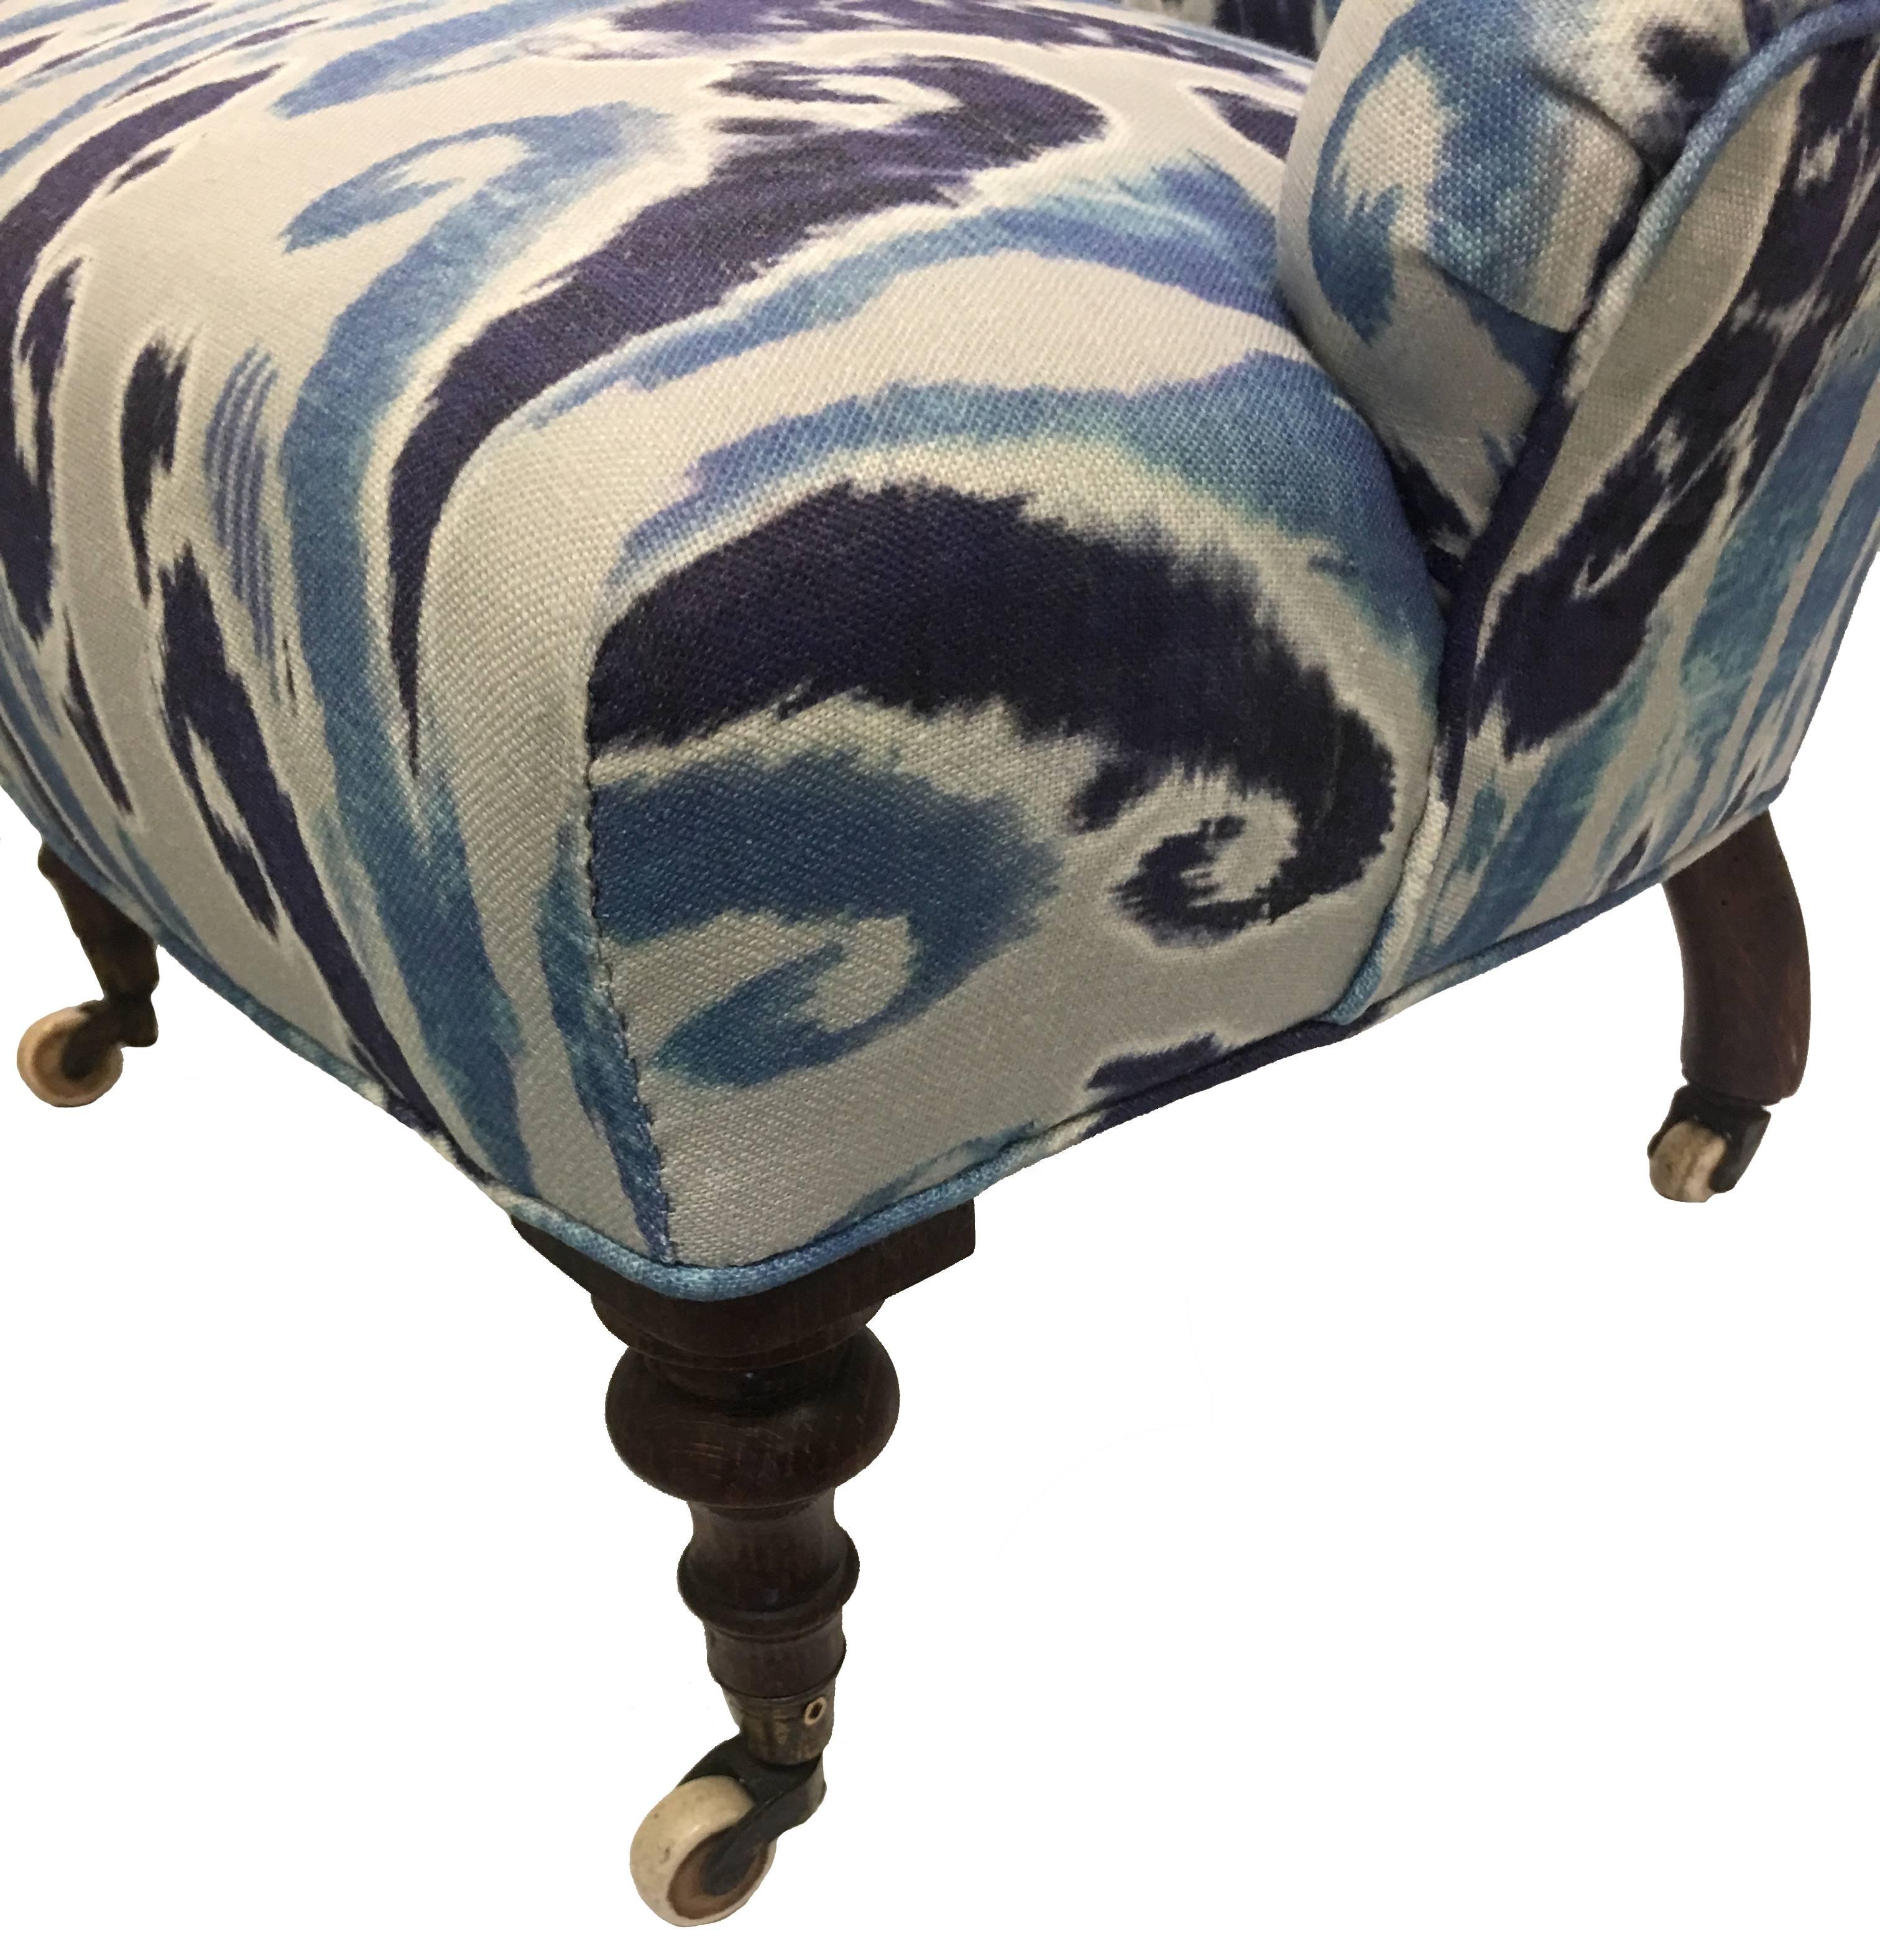 Rare 1880s child's size upholstered slipper chair. Newly upholstered in Old World Weavers 'Island Ikat' linen. Original ceramic castors on all four feet. Seat is 10" tall x 13.5" deep.